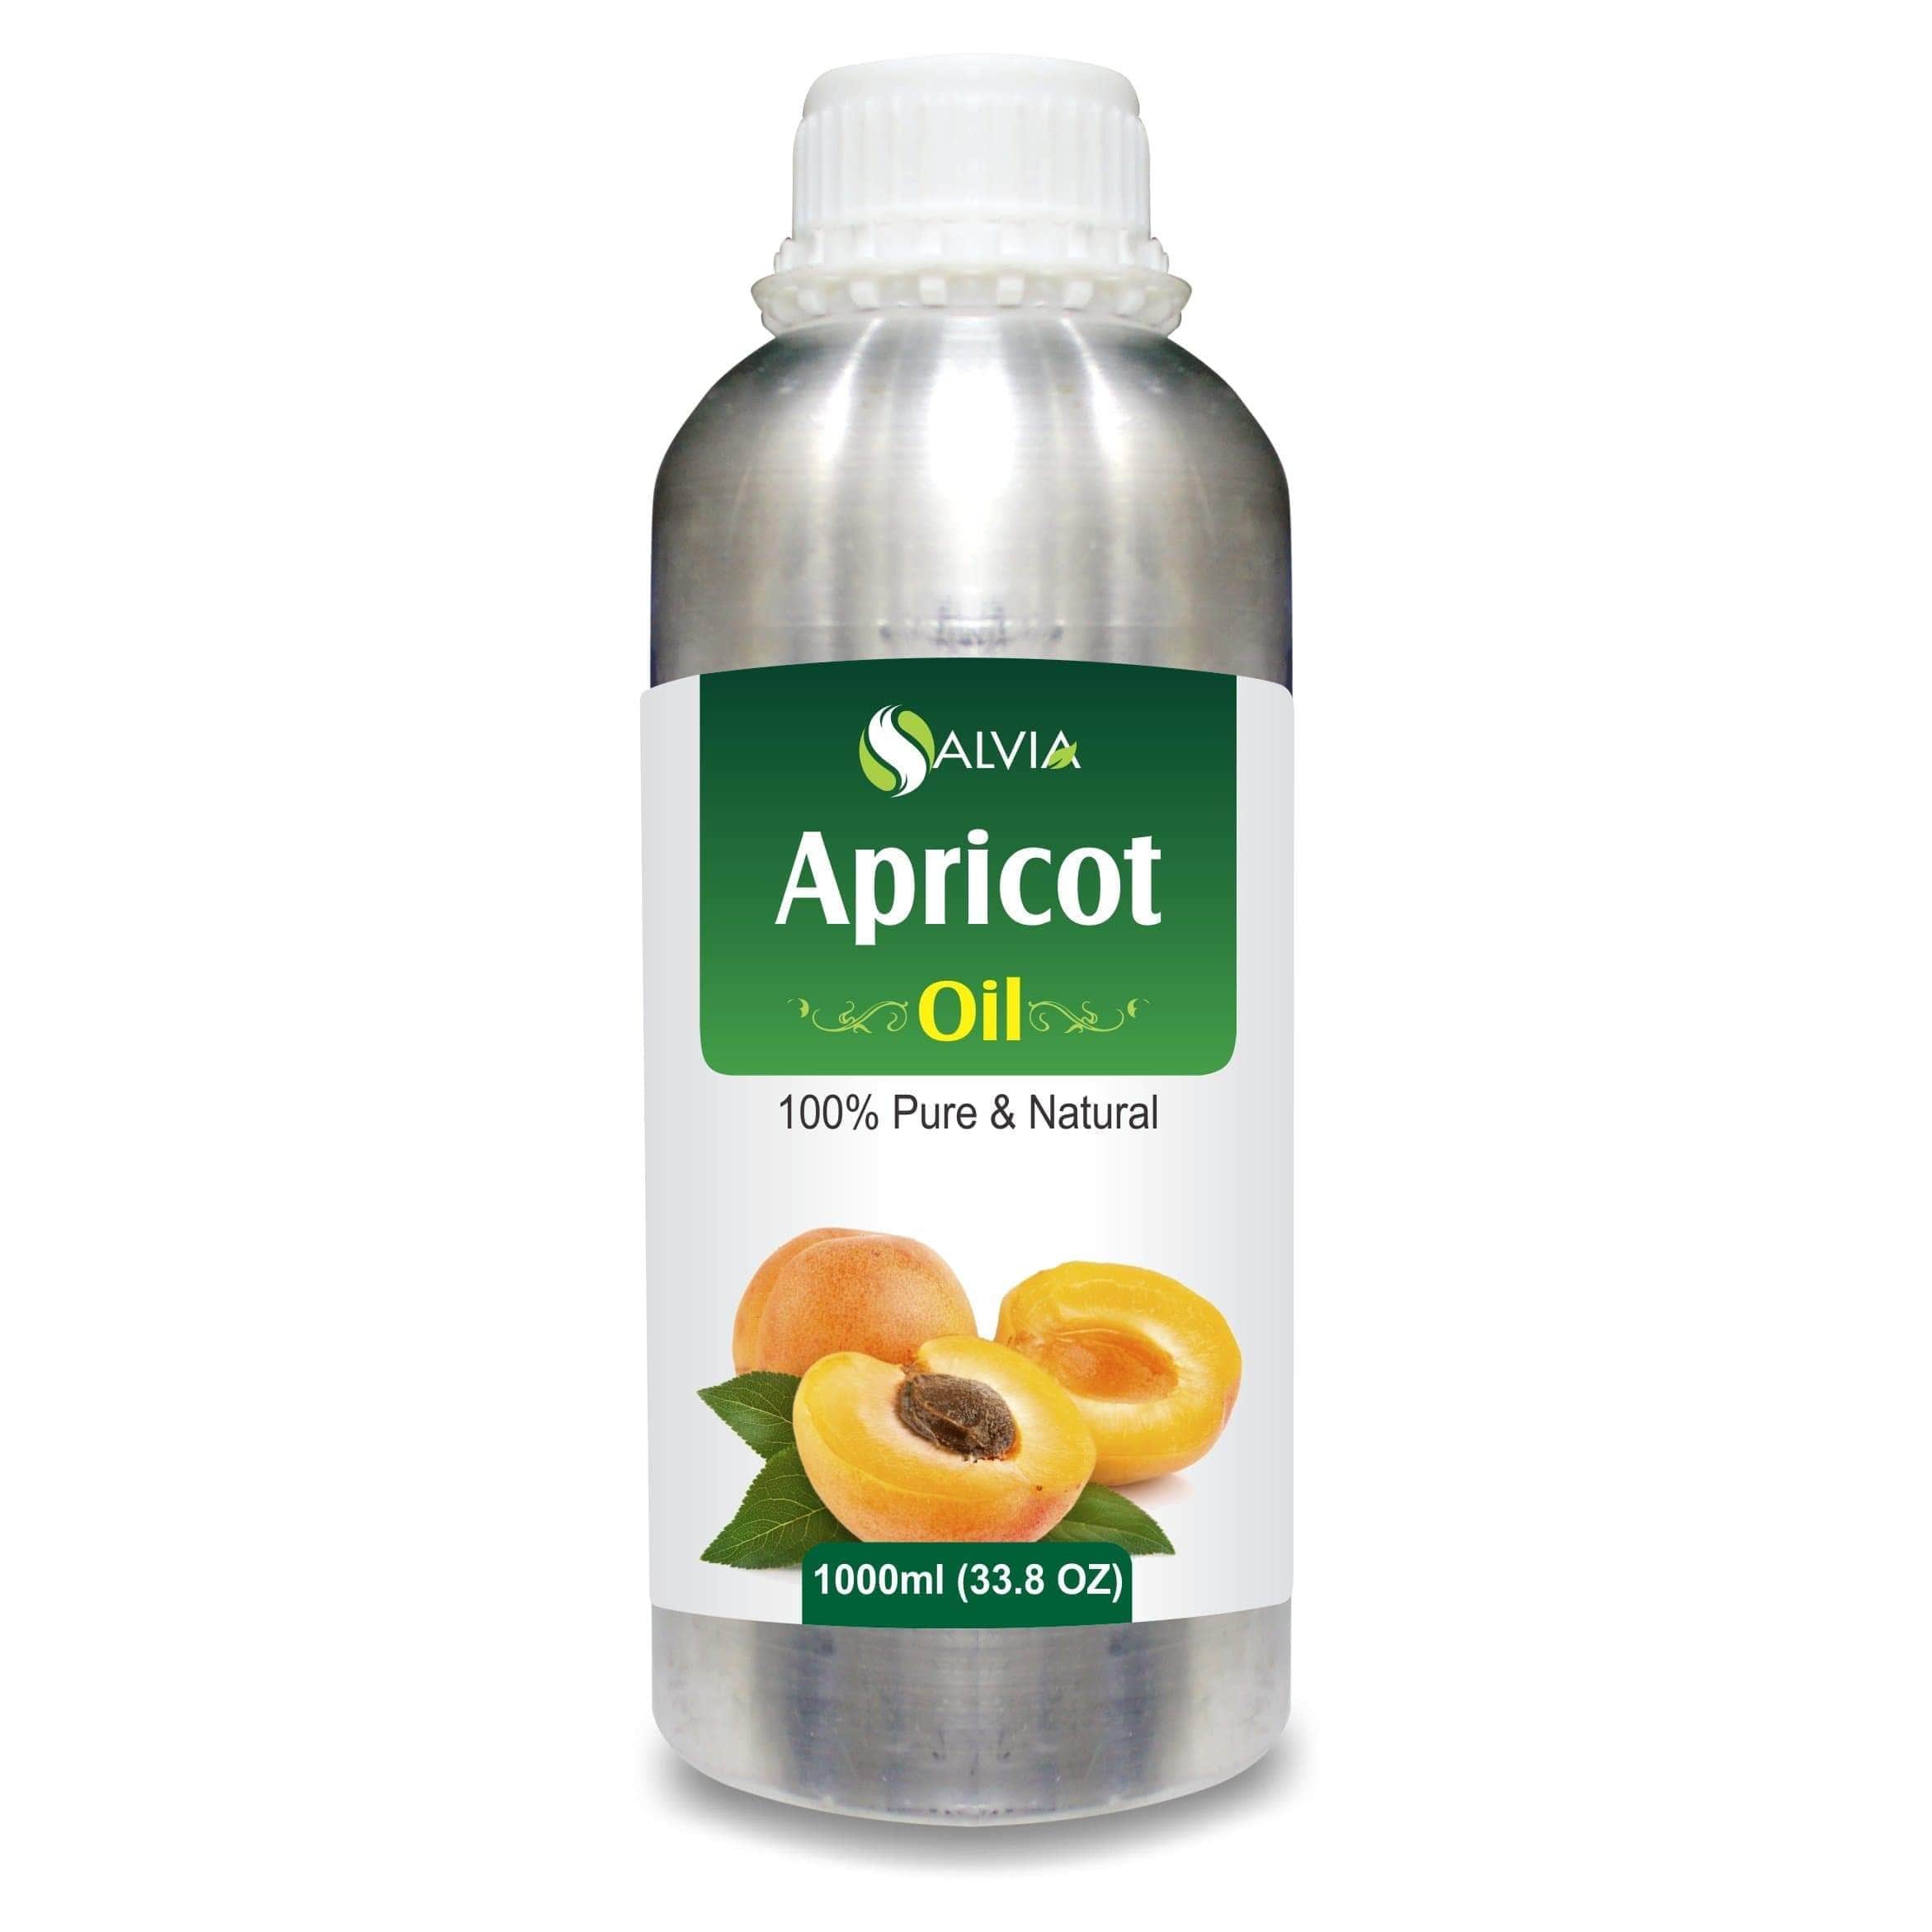 apricot oil benefits for hair